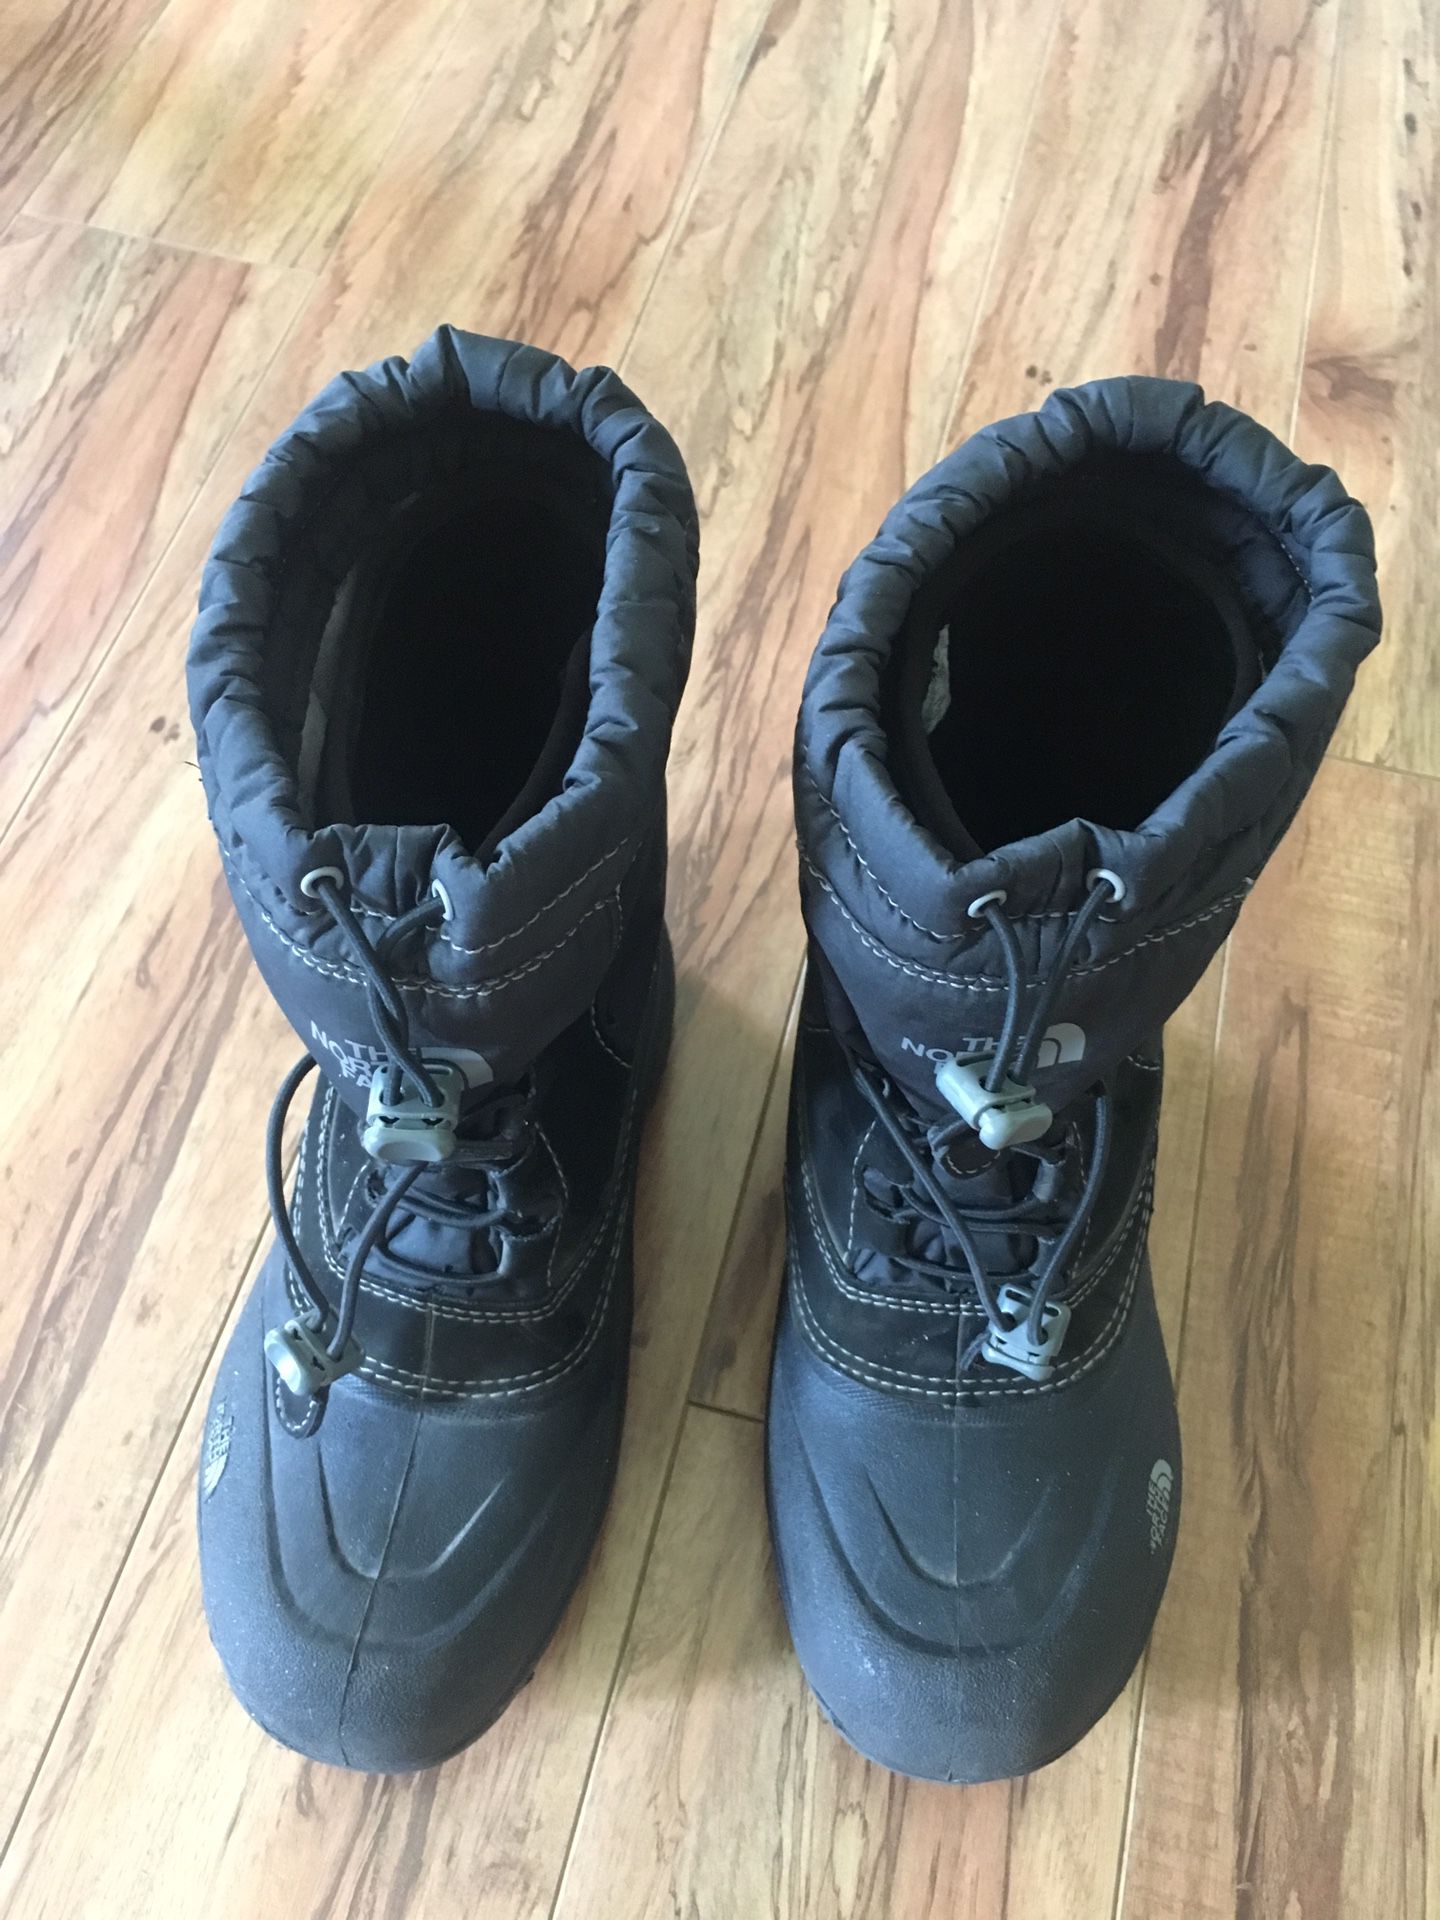 Kids snow boots - size 4 (North Face)